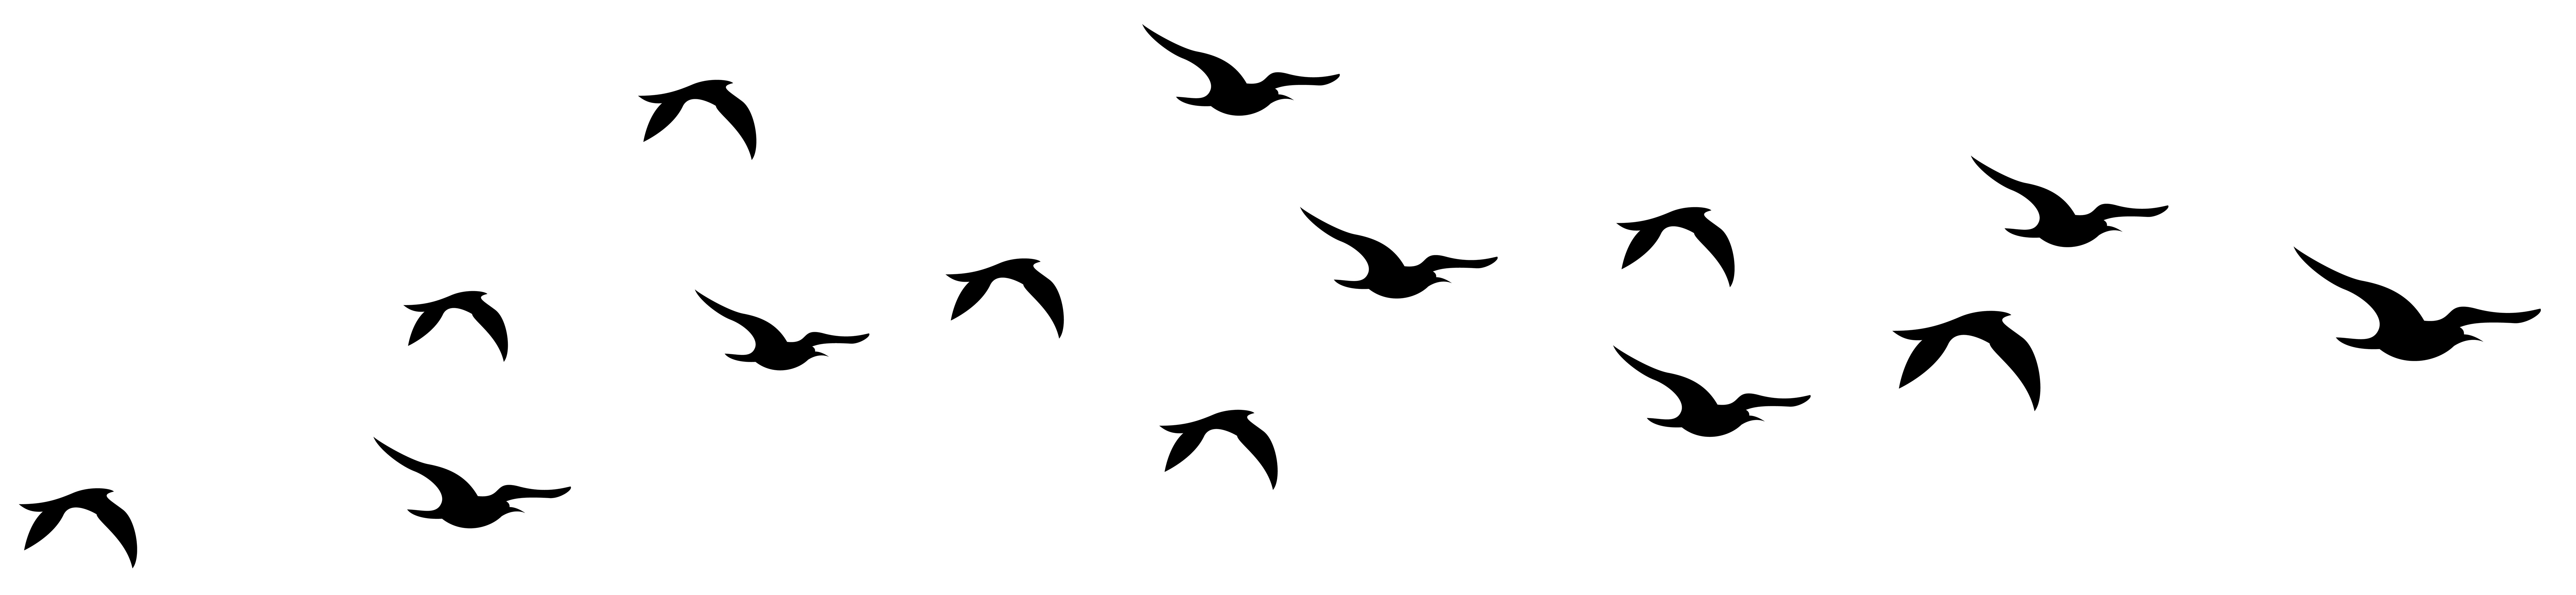 Bird Silhouette Flying icons